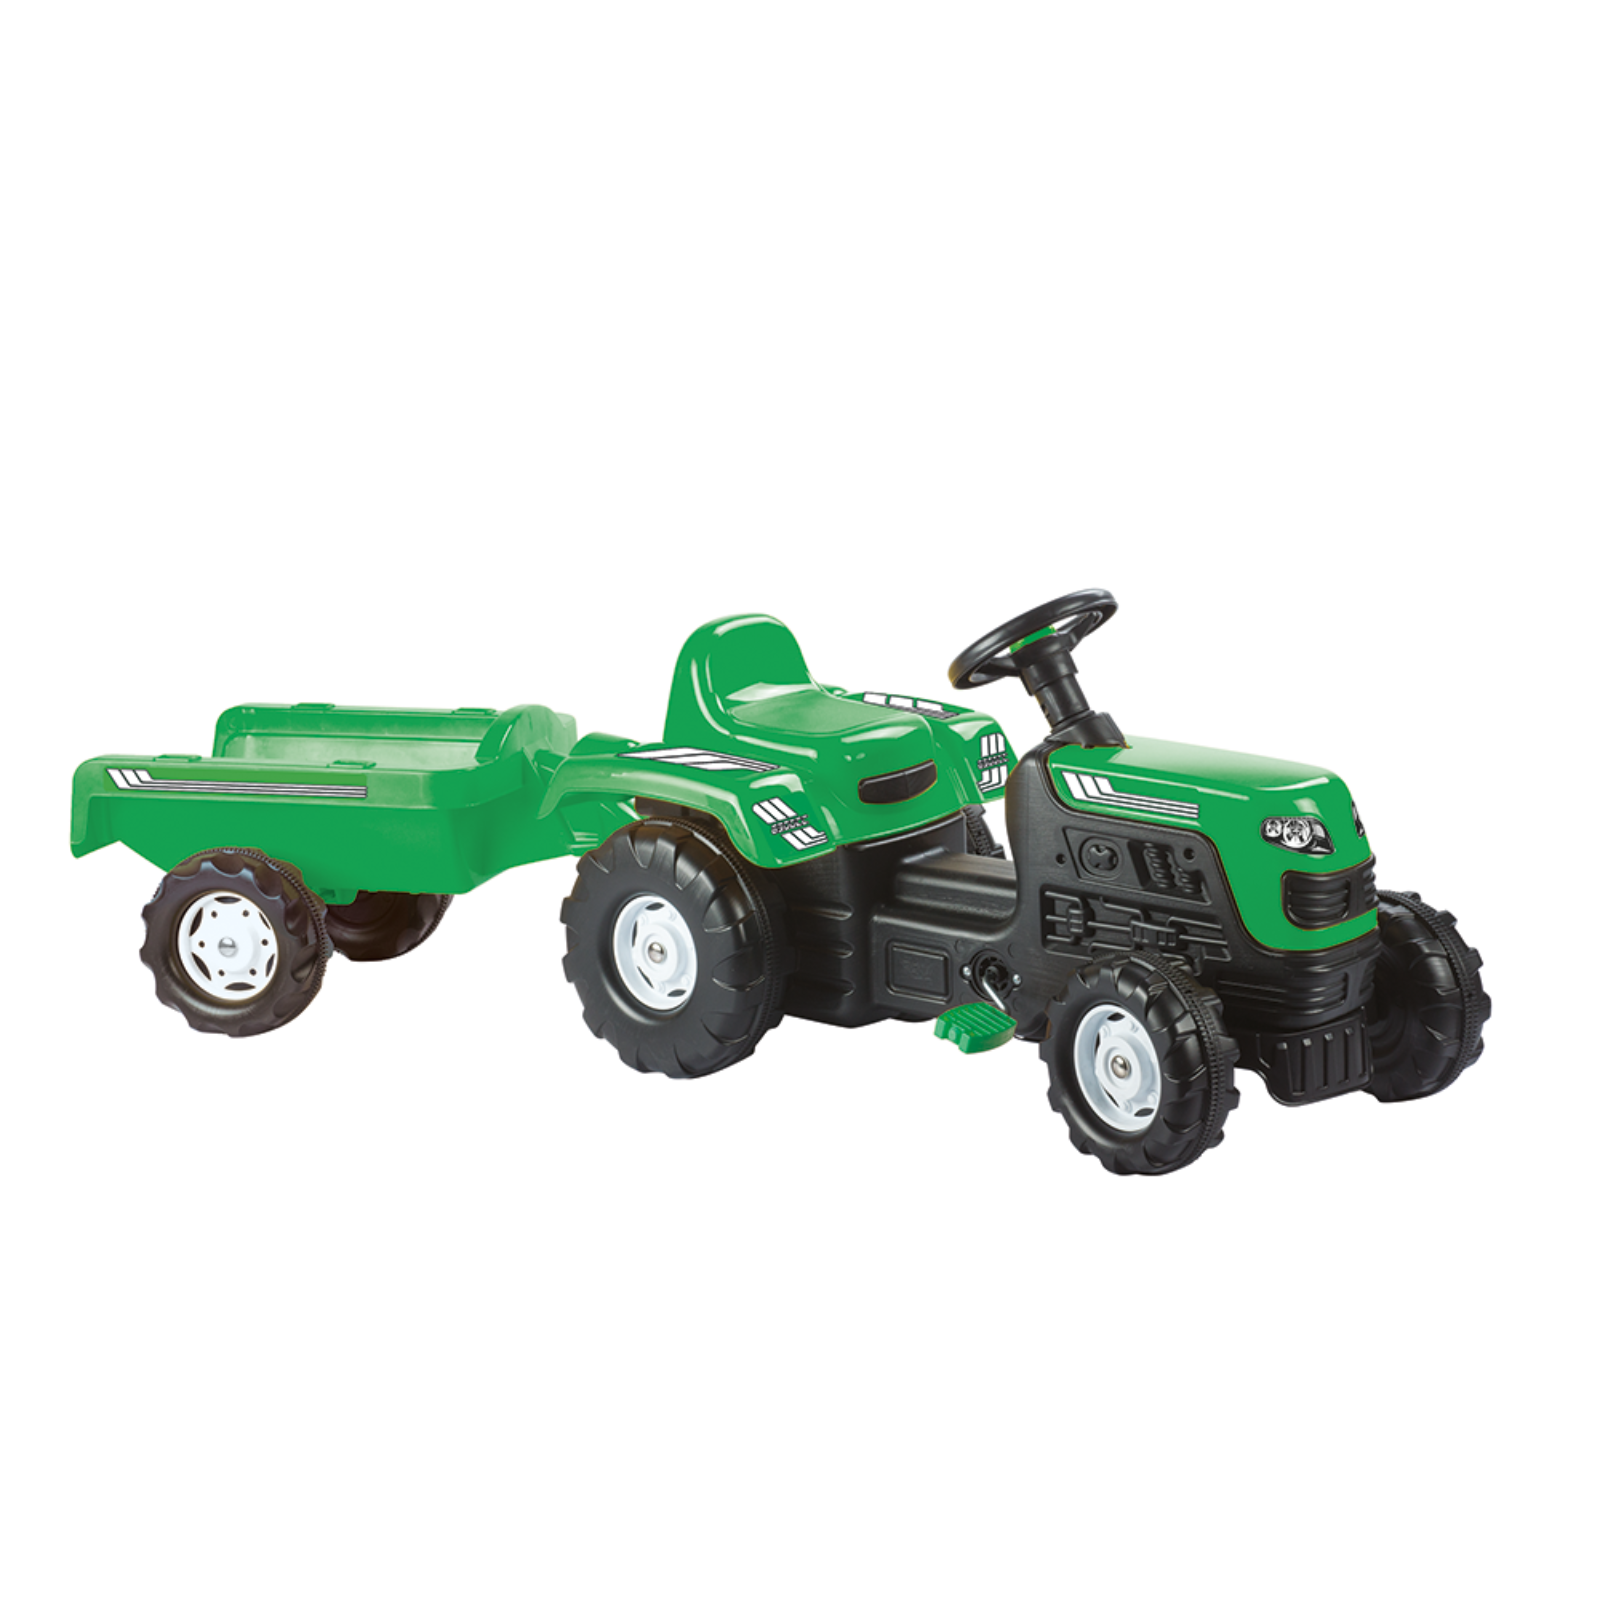 Ride-on Large Pedal Tractor with Trailer - Green (3 - 5 Years)